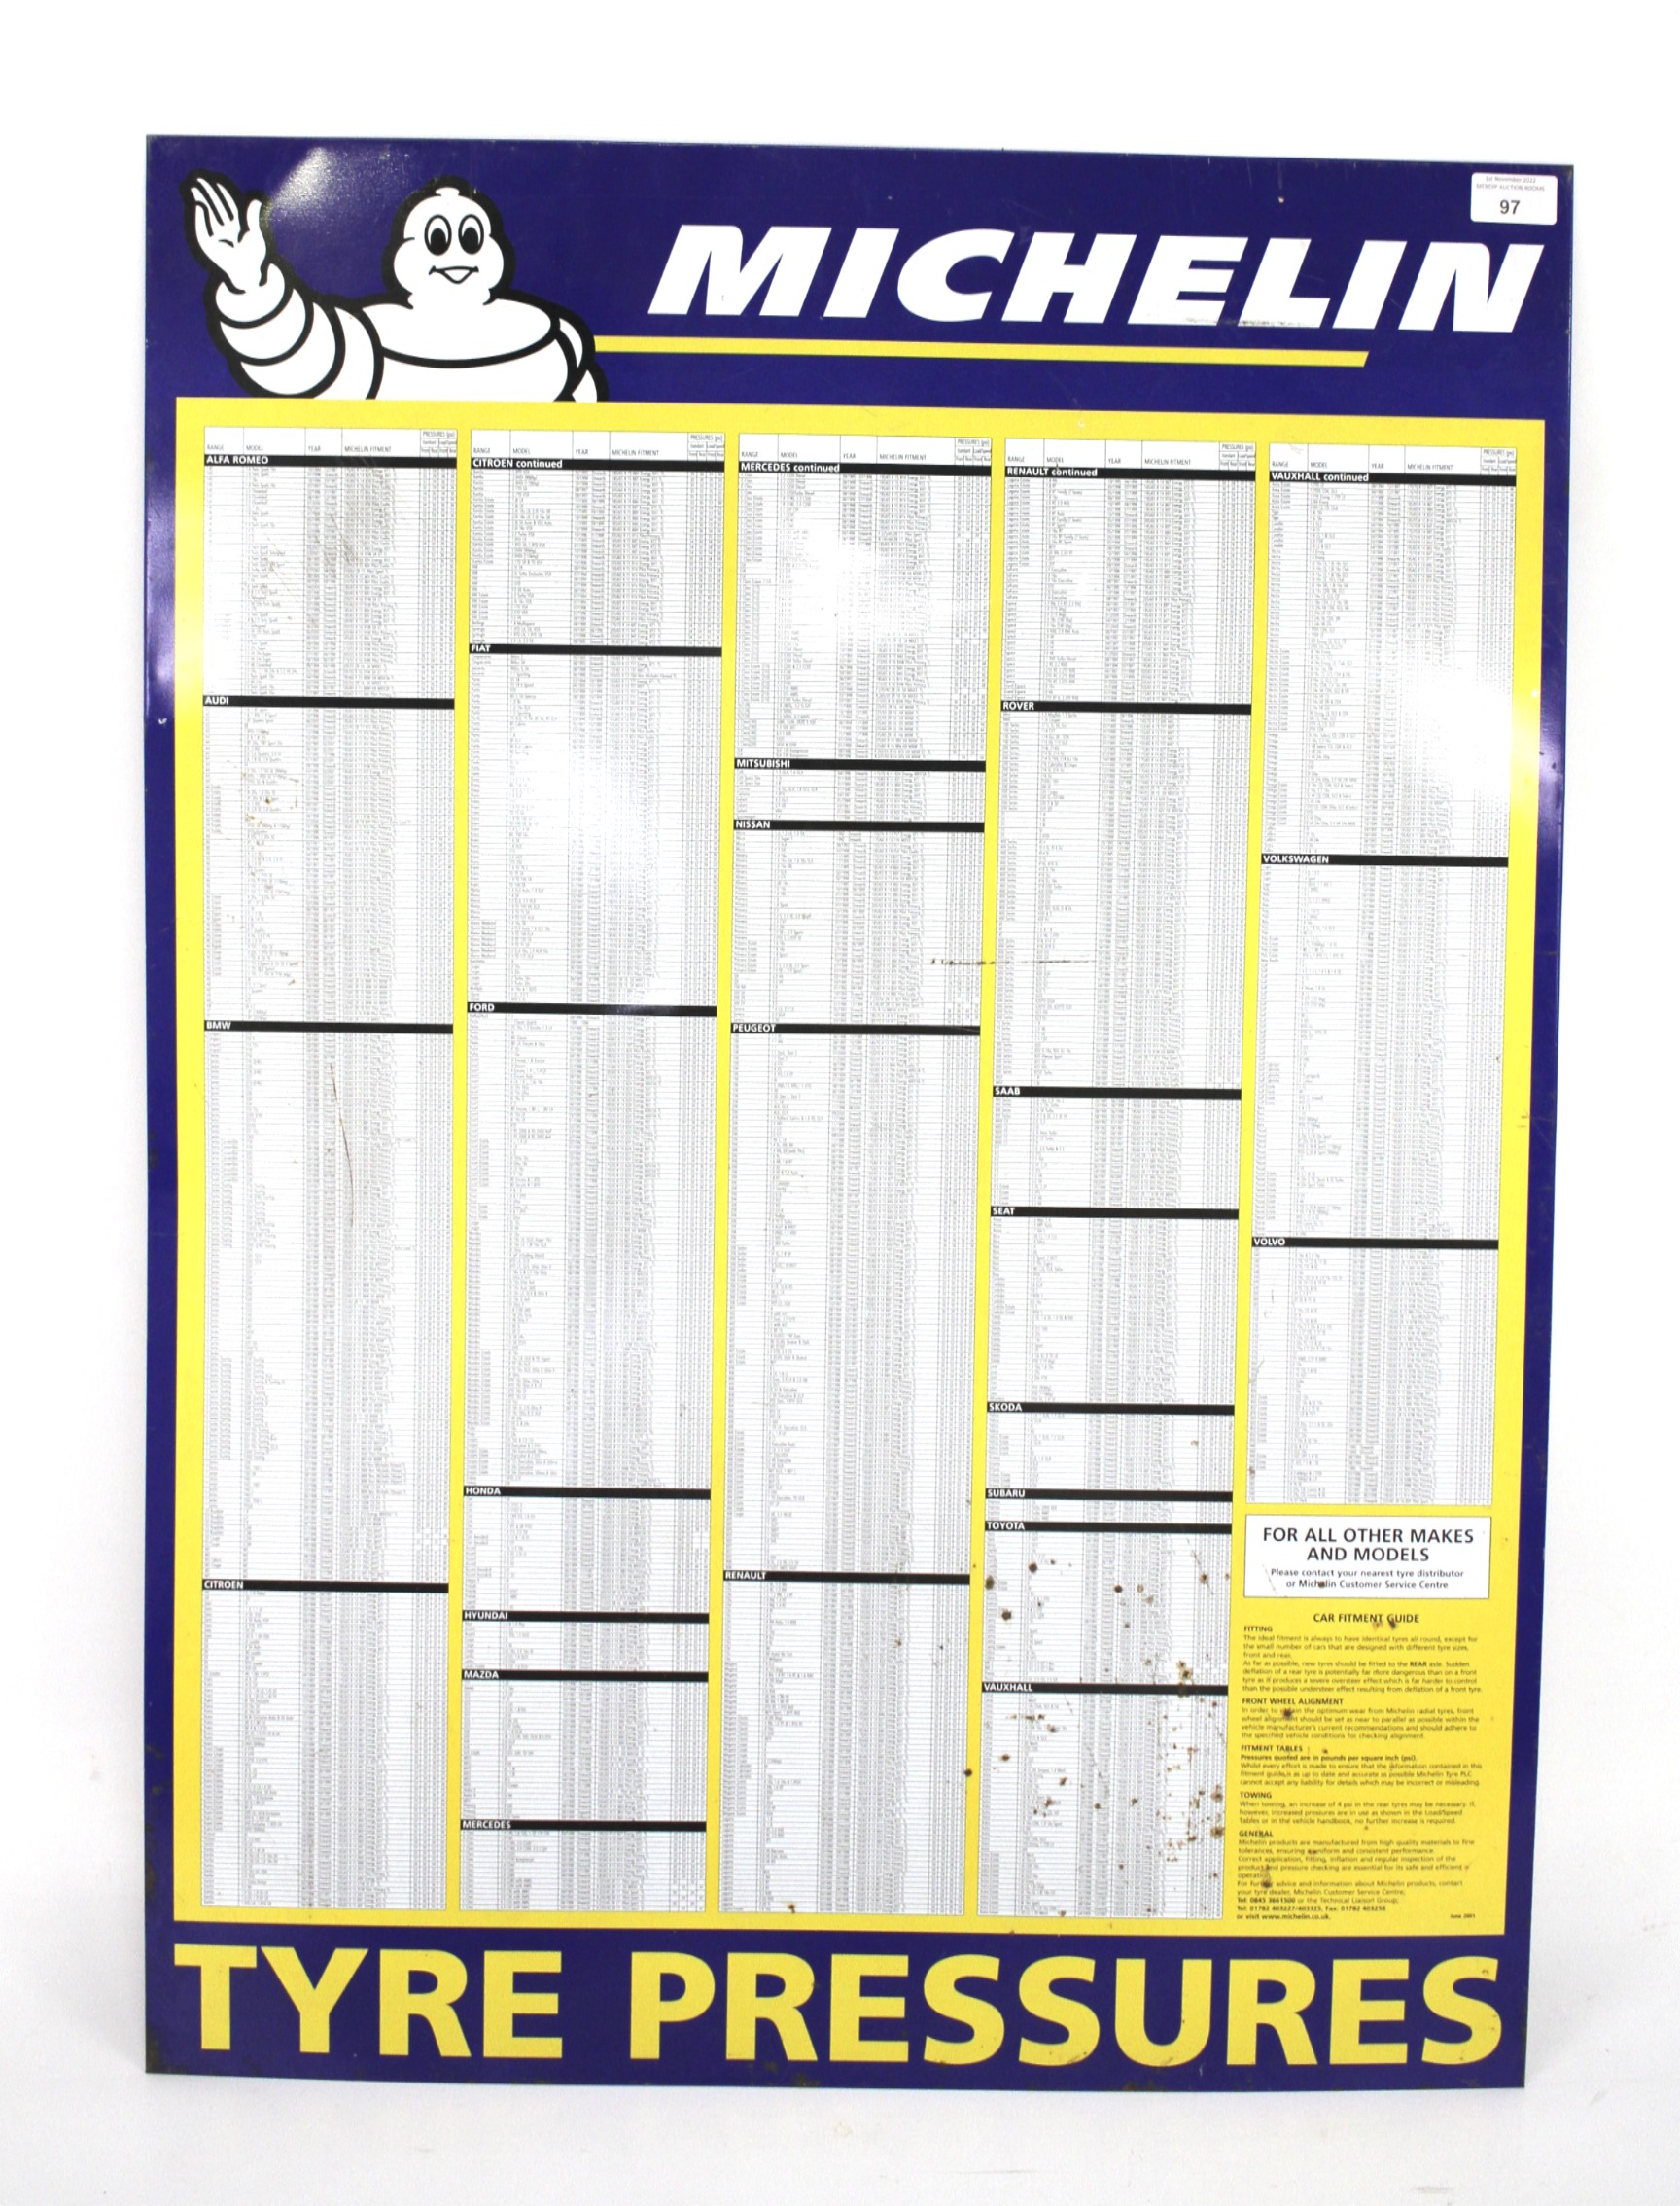 A vintage metal Michelin tyre pressure gauge wall mounting chart.